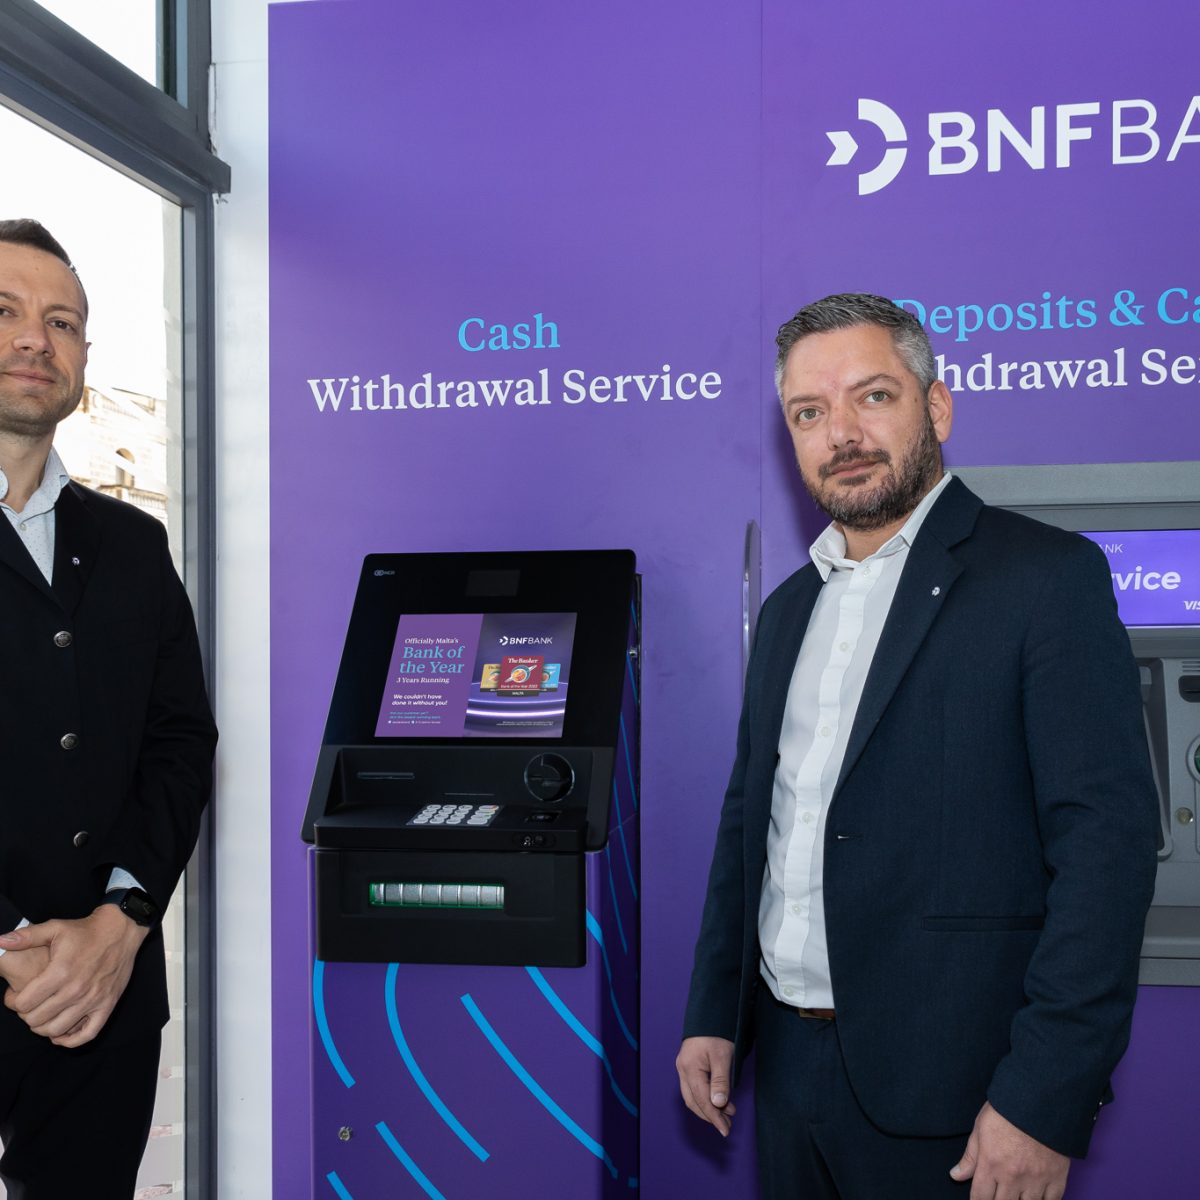 More ATMs For BNF Bank Customers